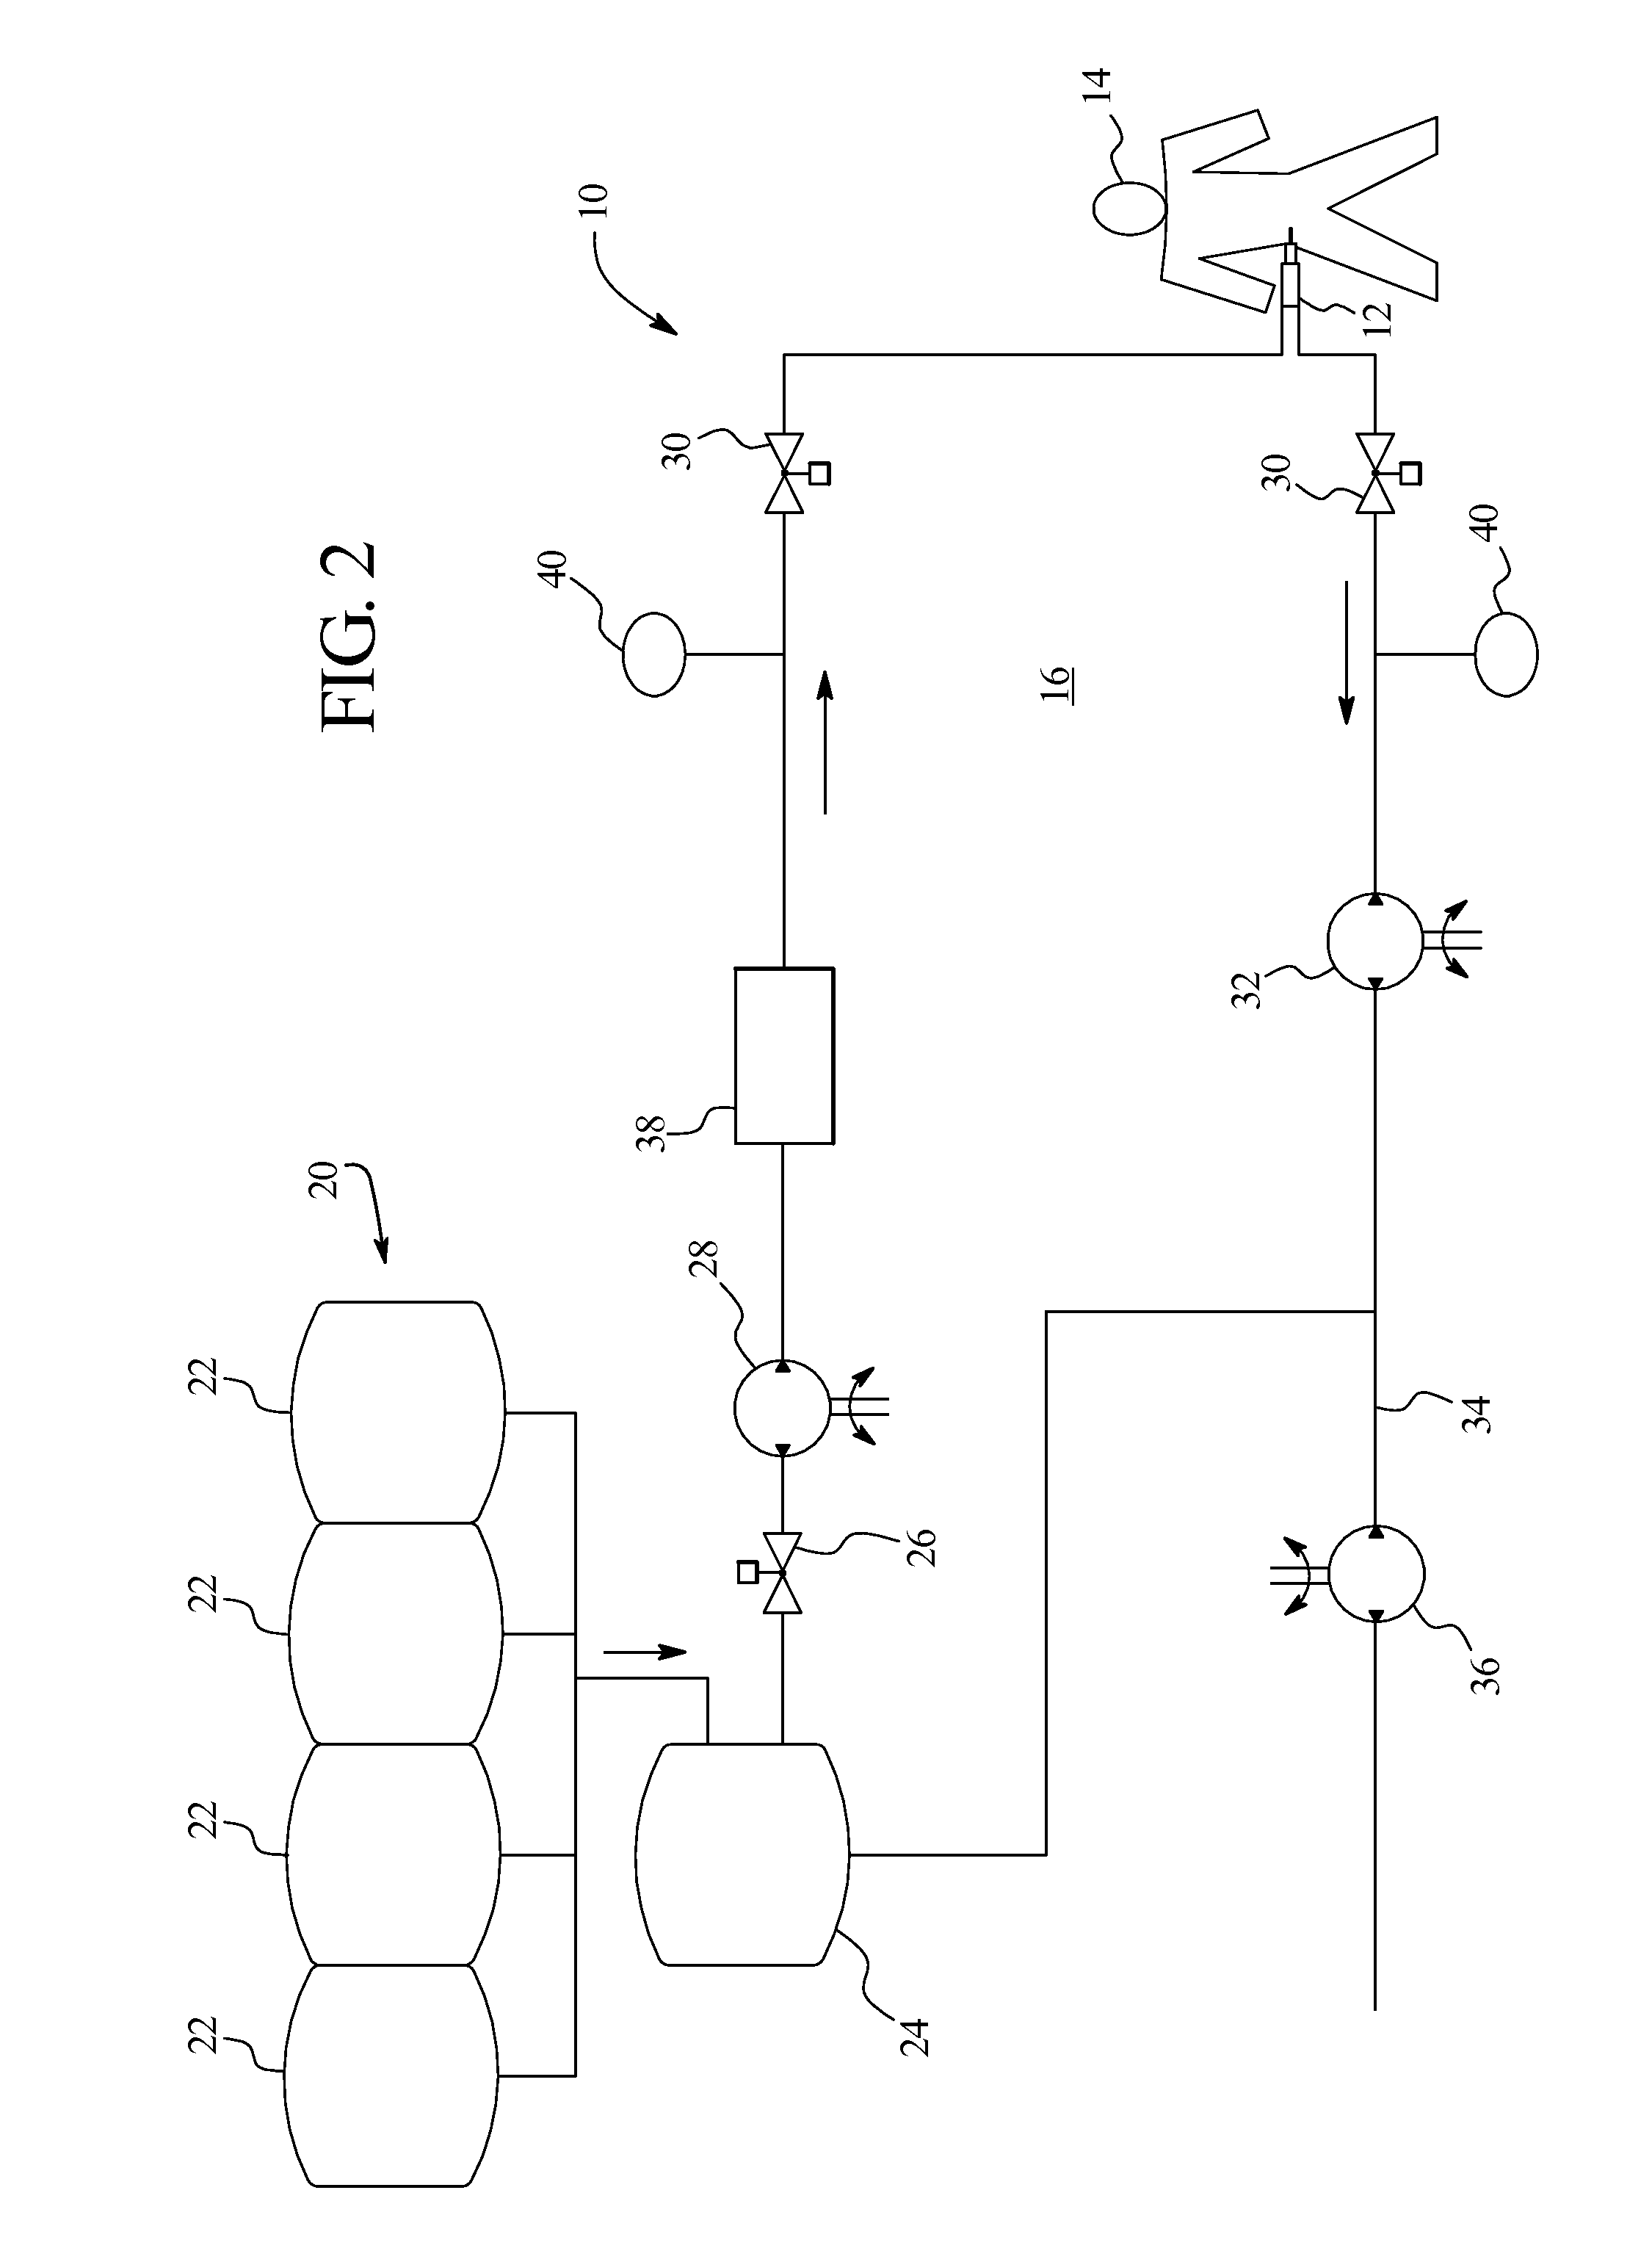 Systems and methods for performing peritoneal dialysis